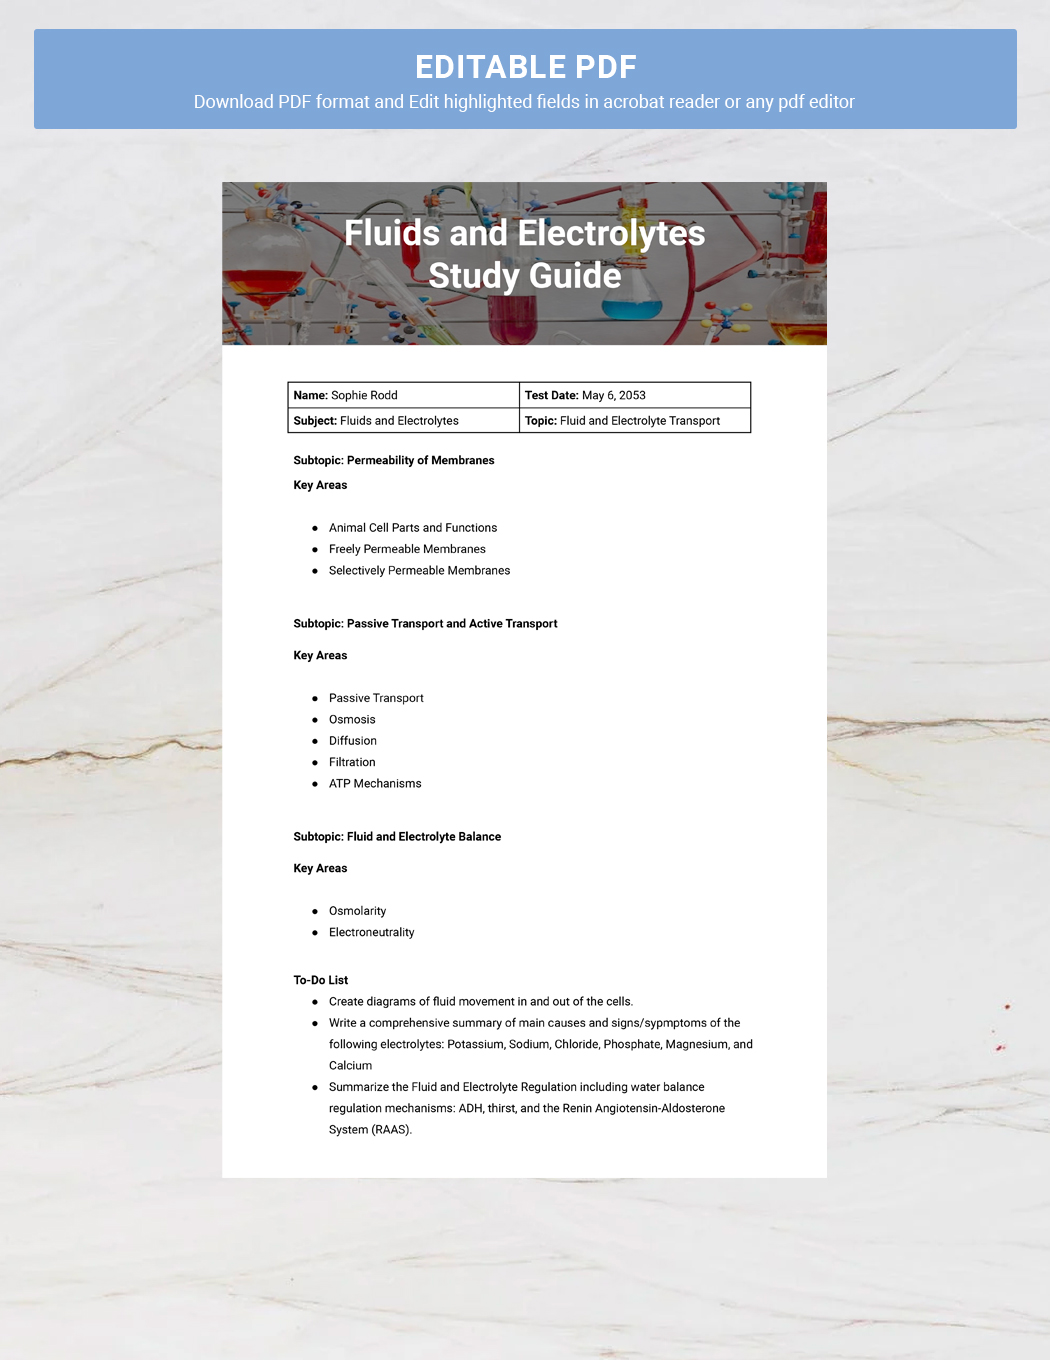 Fluids and Electrolytes Study Guide Template